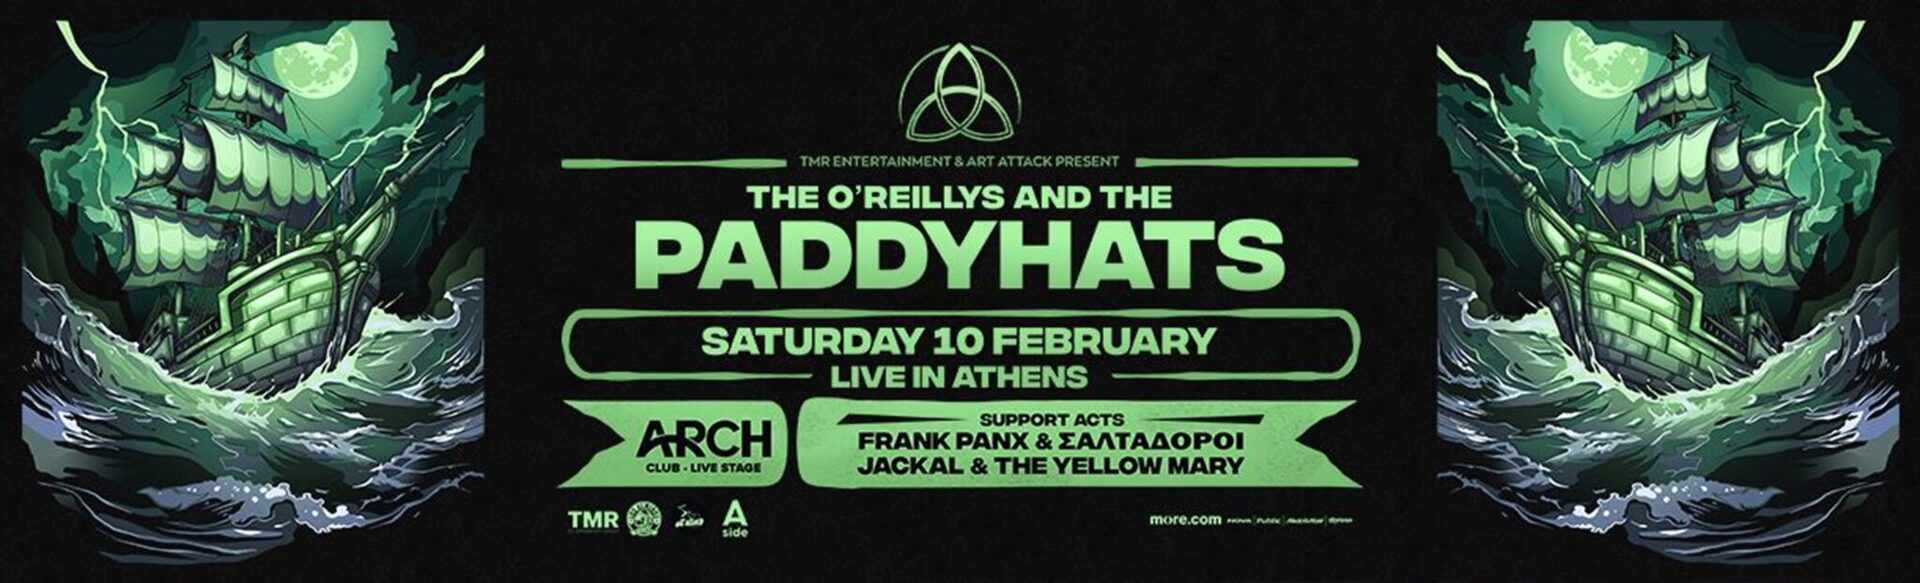 O’Reillys and the Paddyhats